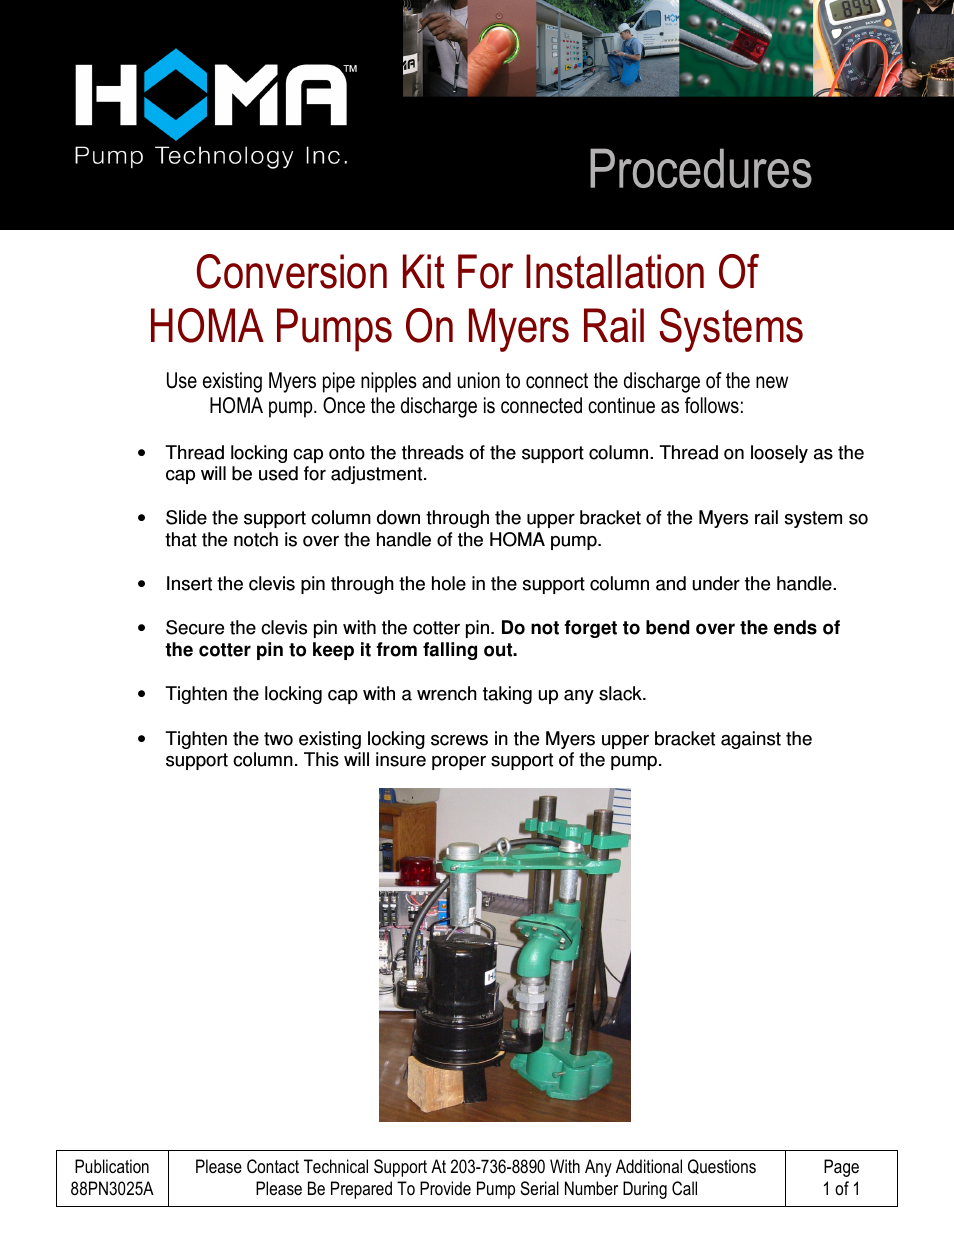 Conversion Kit For Installation Of HOMA Pumps On Myers Rail Systems